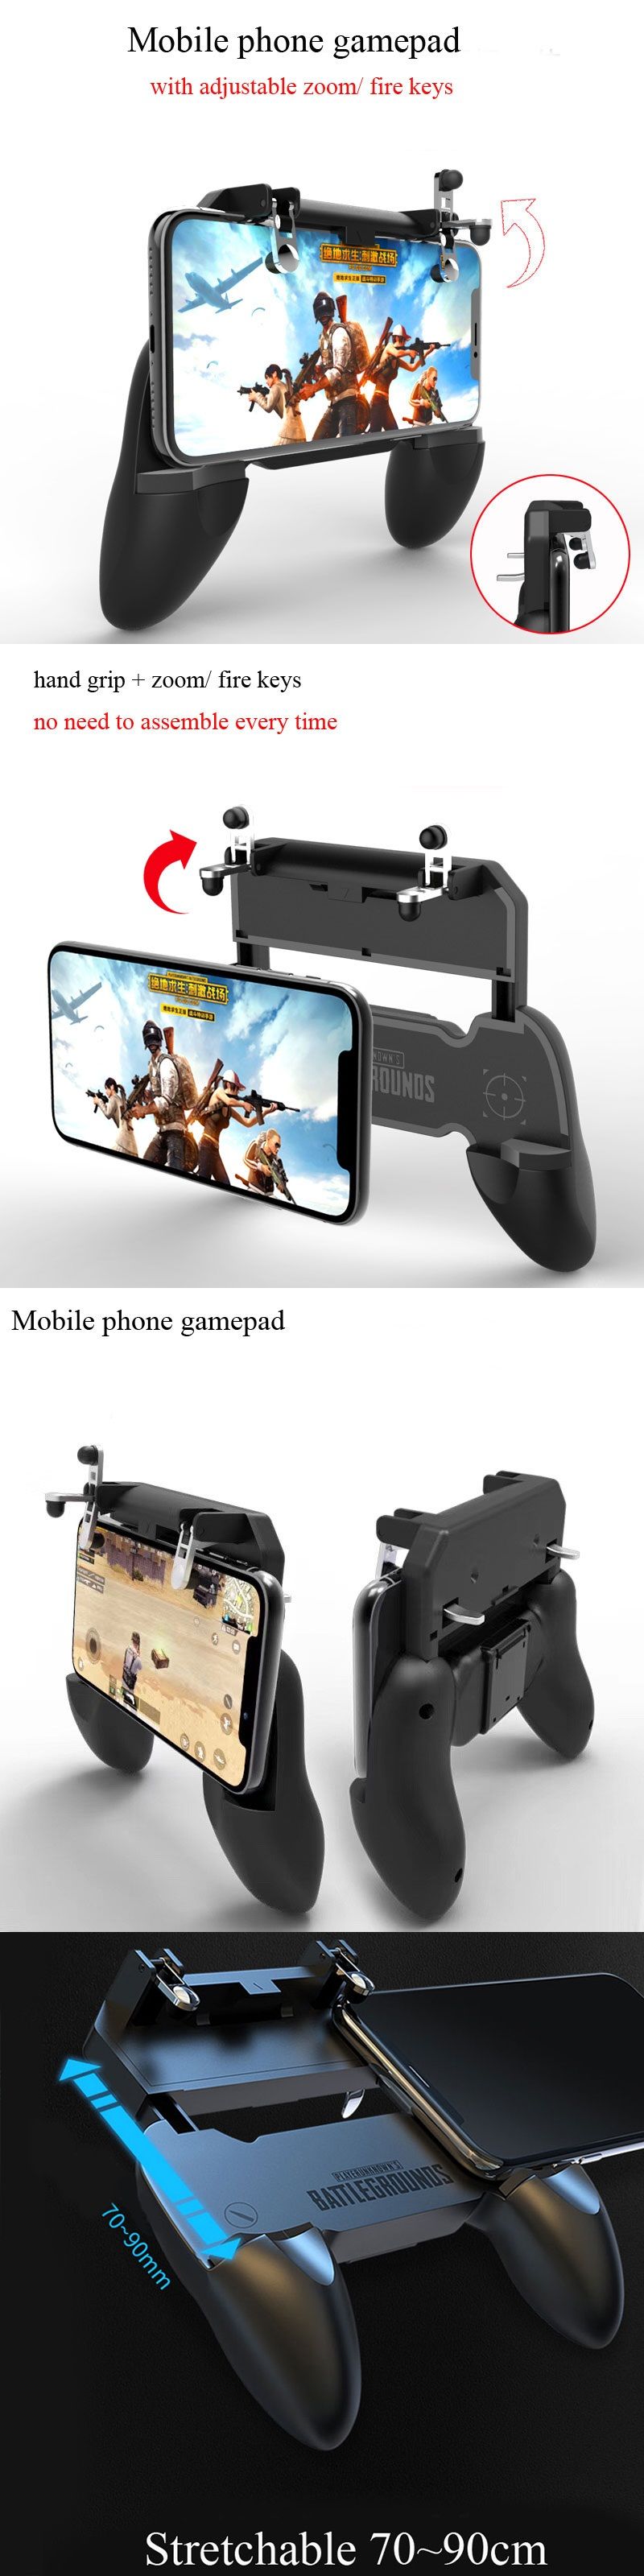 Bakeey-K21-W1-PUGB--Peace-Elite-Gaming-Pad-Fast-Shooting-Button-Controller-Gamepad-For-iPhone-X-XS-H-1551470